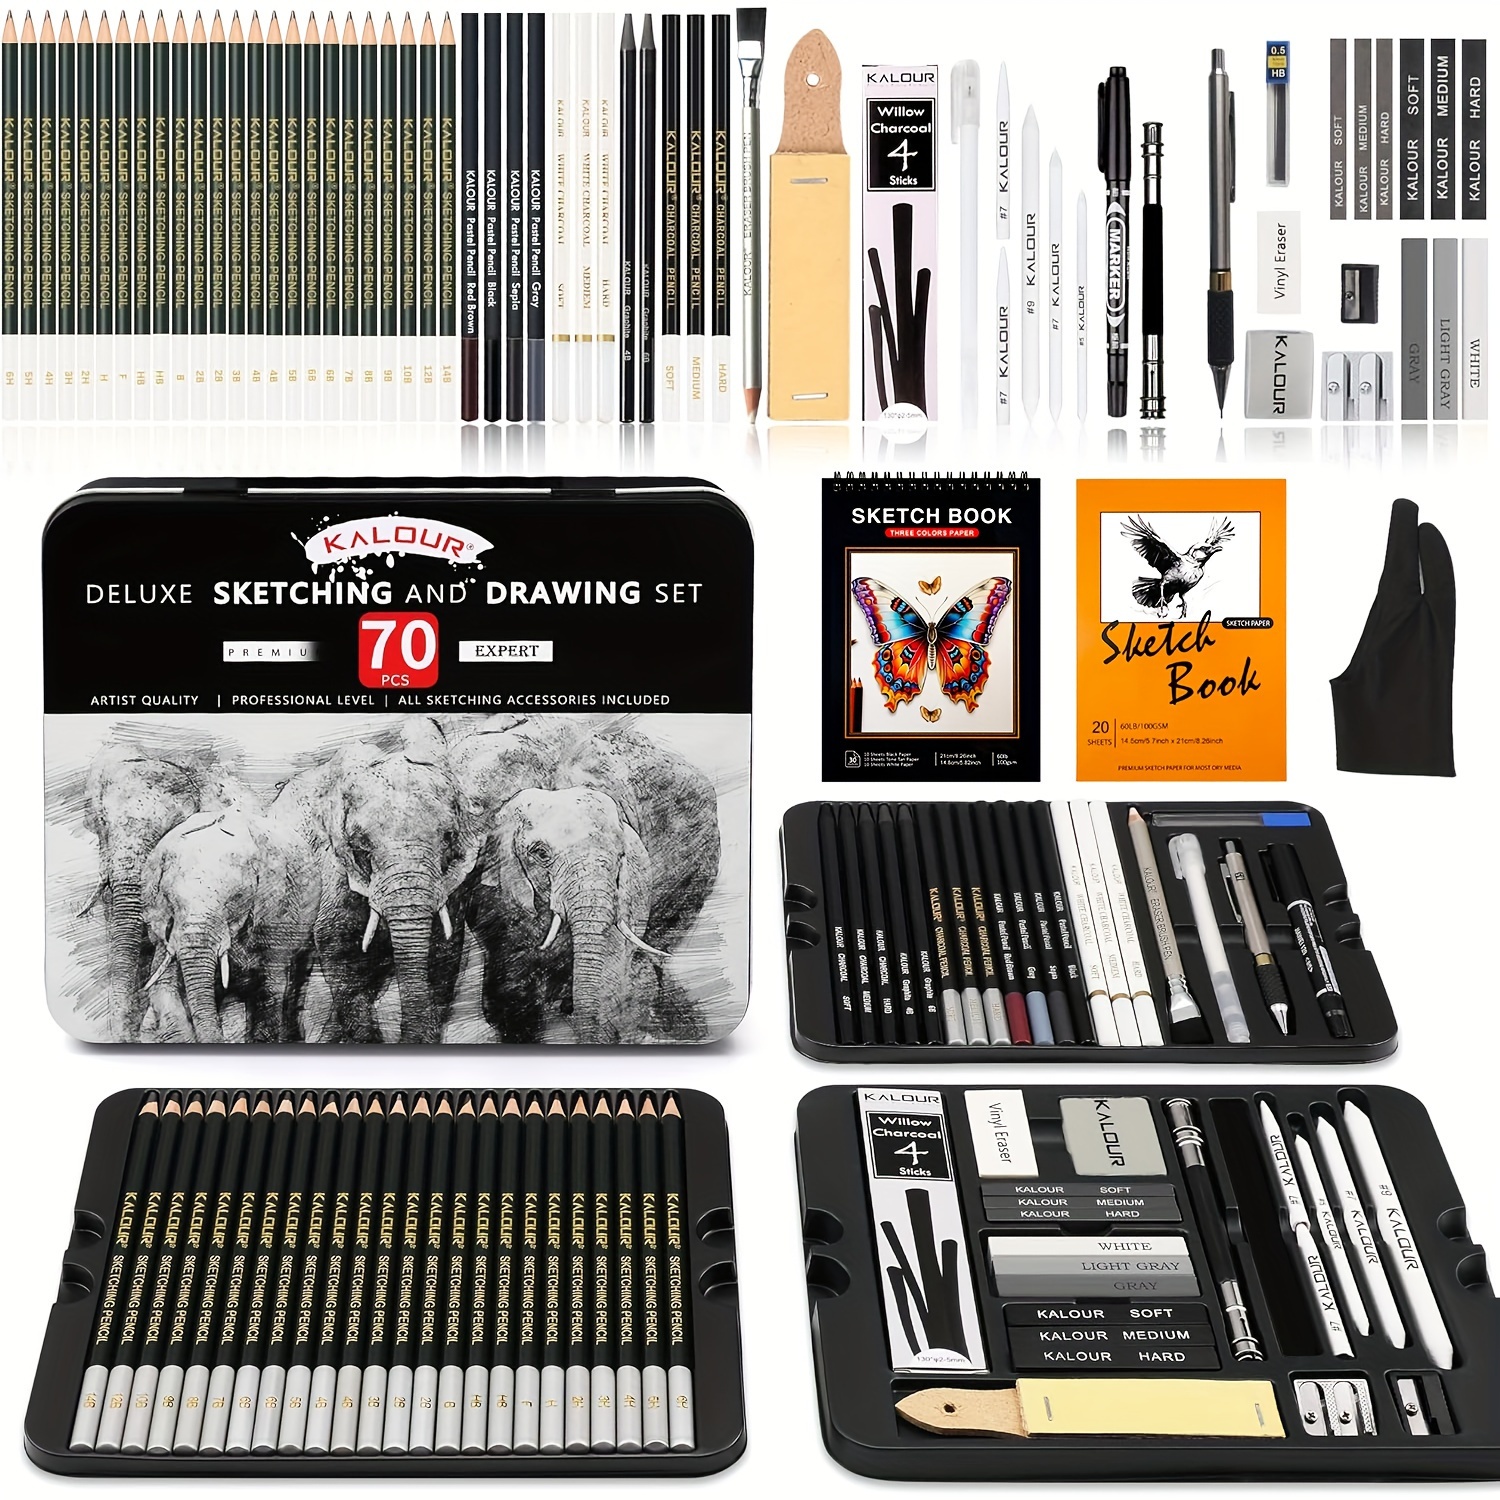 

Kalour Complete Sketching Set - Erasable Graphite & Charcoal Pencils, Drawing Glove, Tin Box With Sketchbook & 3-color Paper Elevate Your Art - Essential Tools For Inspired Creations